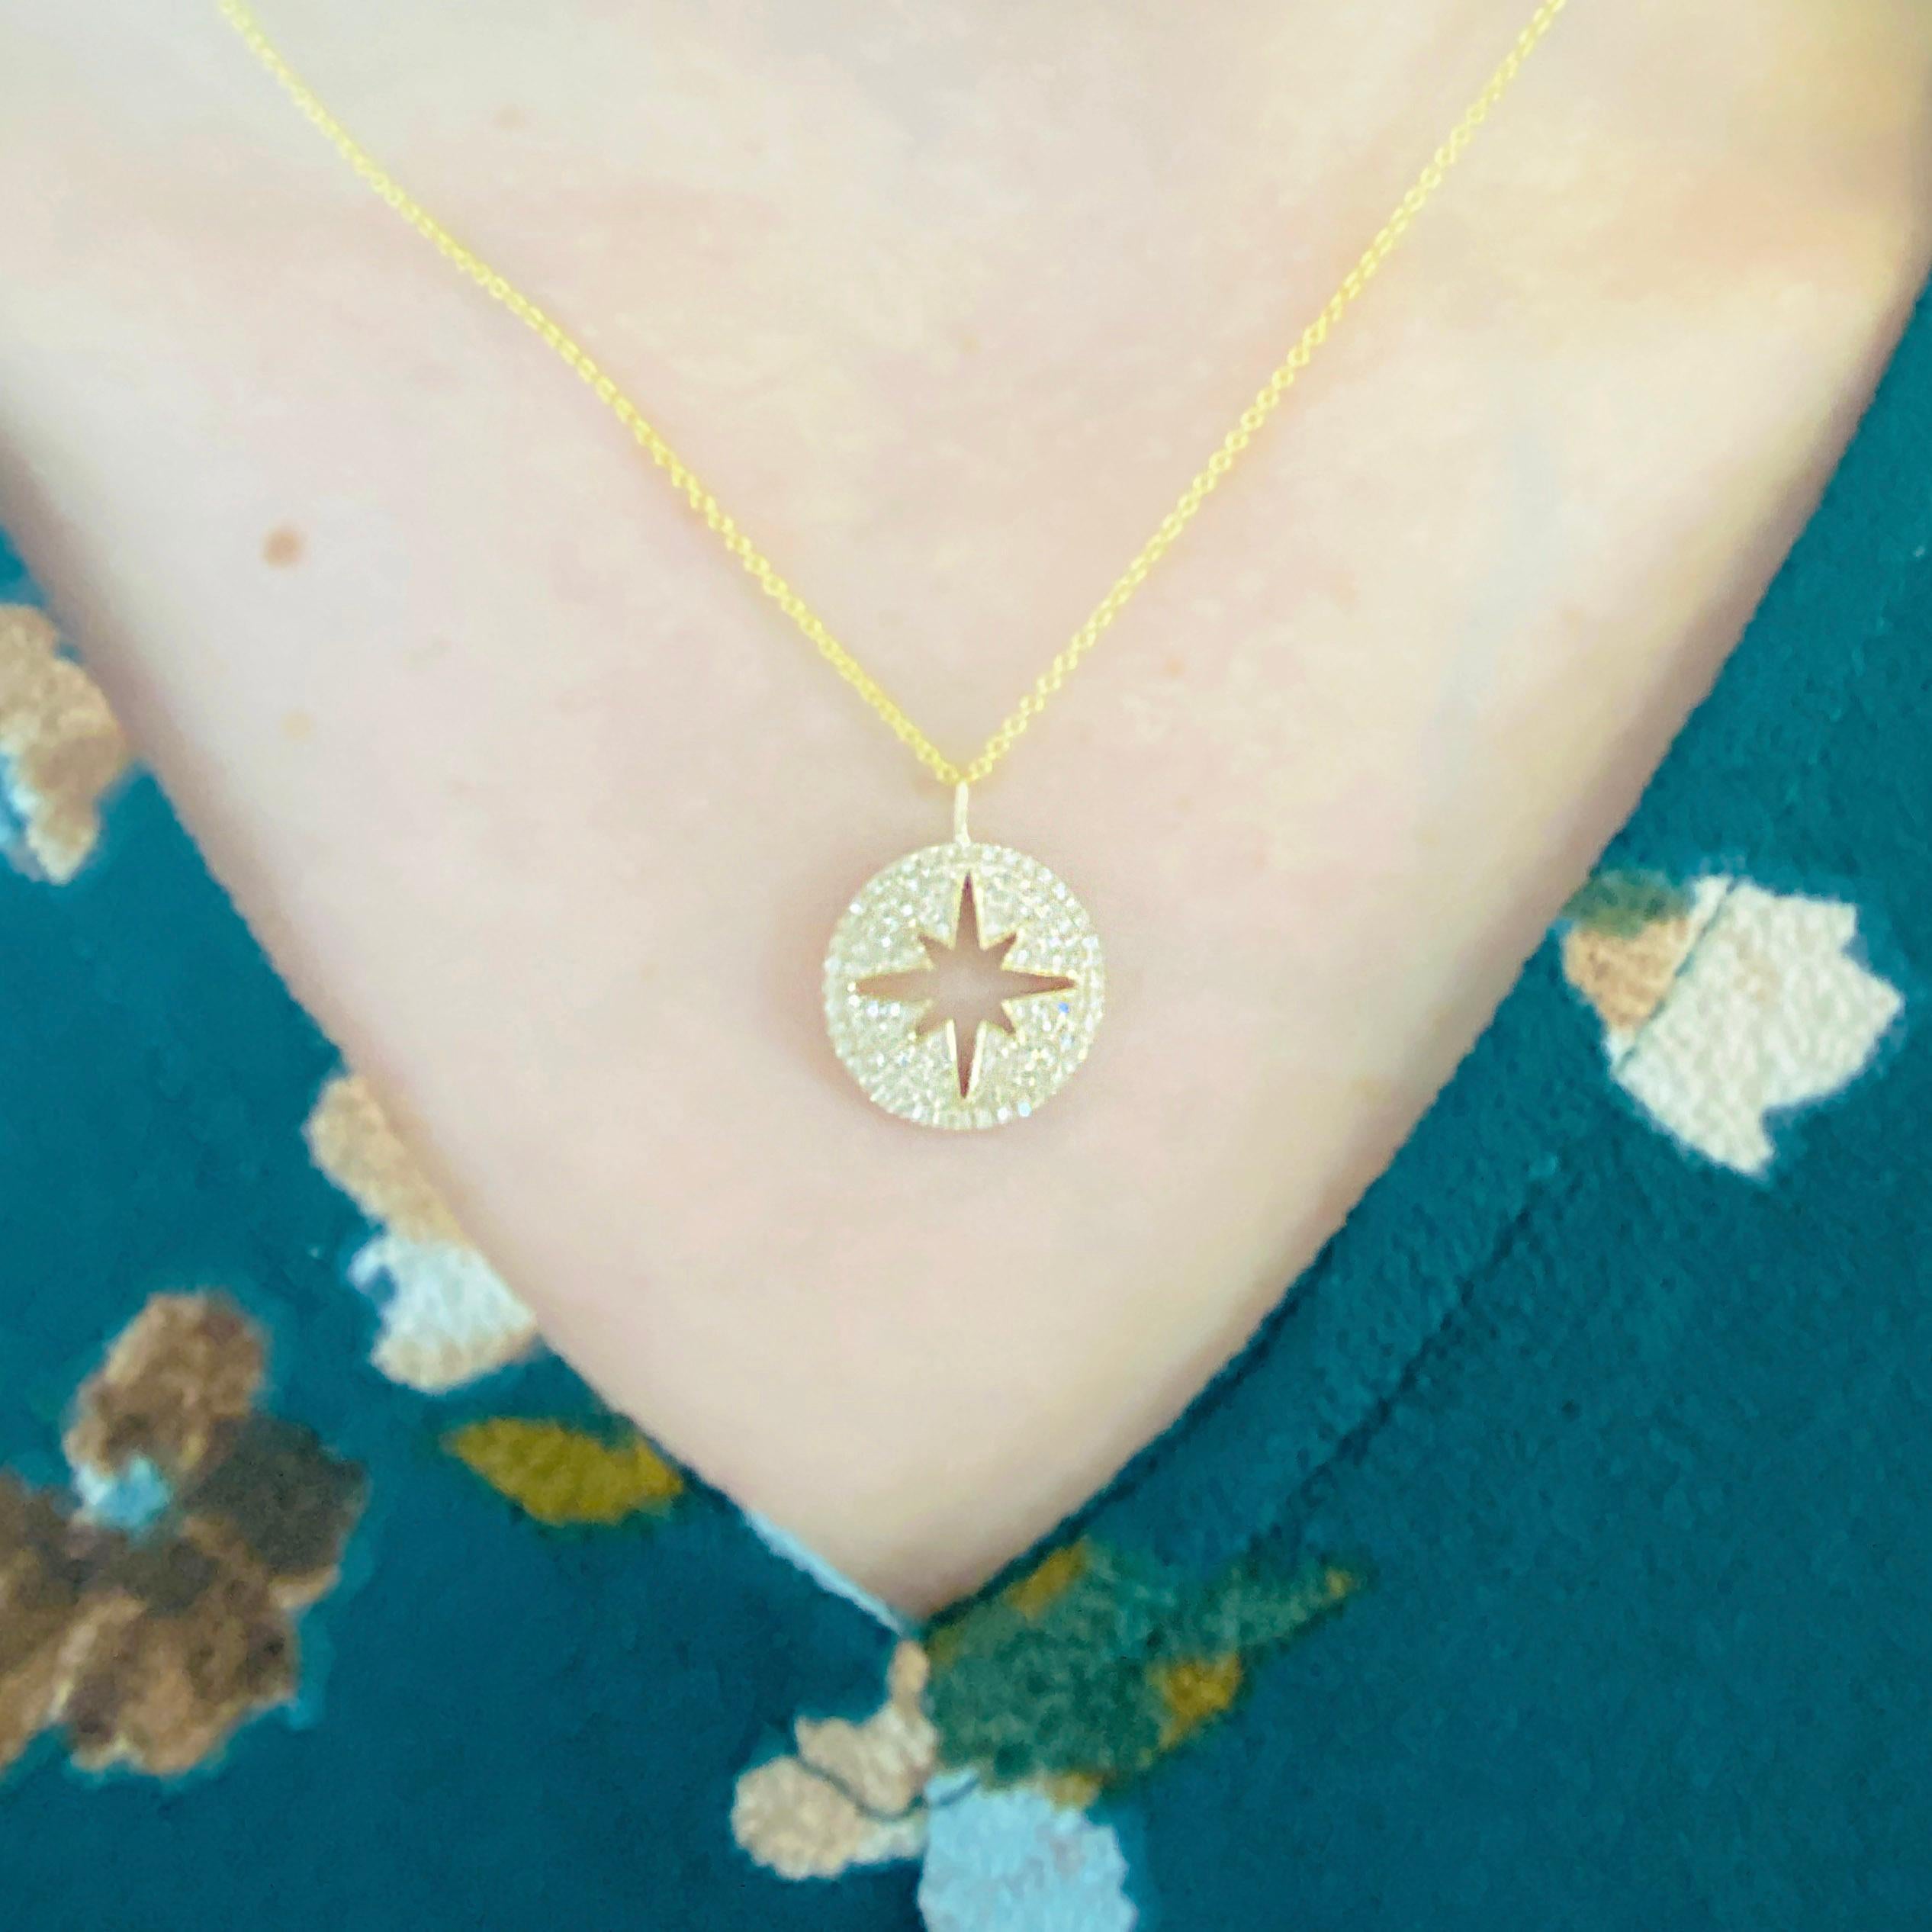 This gorgeous 14k yellow gold pendant dripping with diamonds is the perfect mix between classic and trendy! This necklace represents both the North Star and a compass, symbolizing encouragement and guidance for the journey ahead. This necklace would